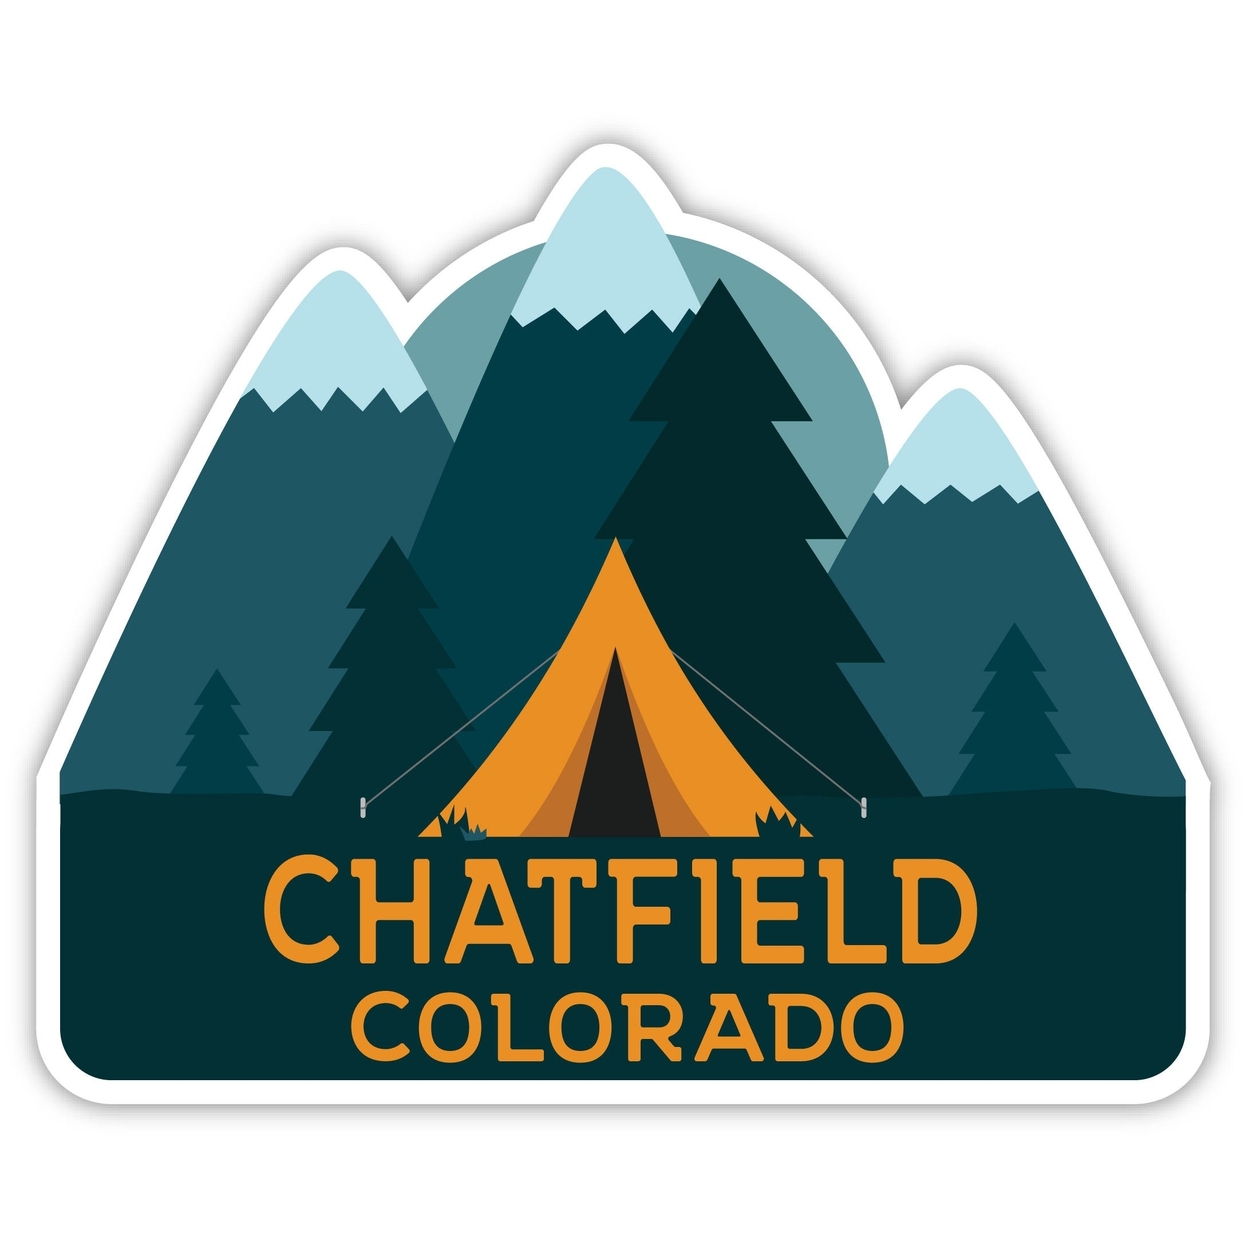 Chatfield Colorado Souvenir Decorative Stickers (Choose Theme And Size) - 4-Pack, 8-Inch, Tent